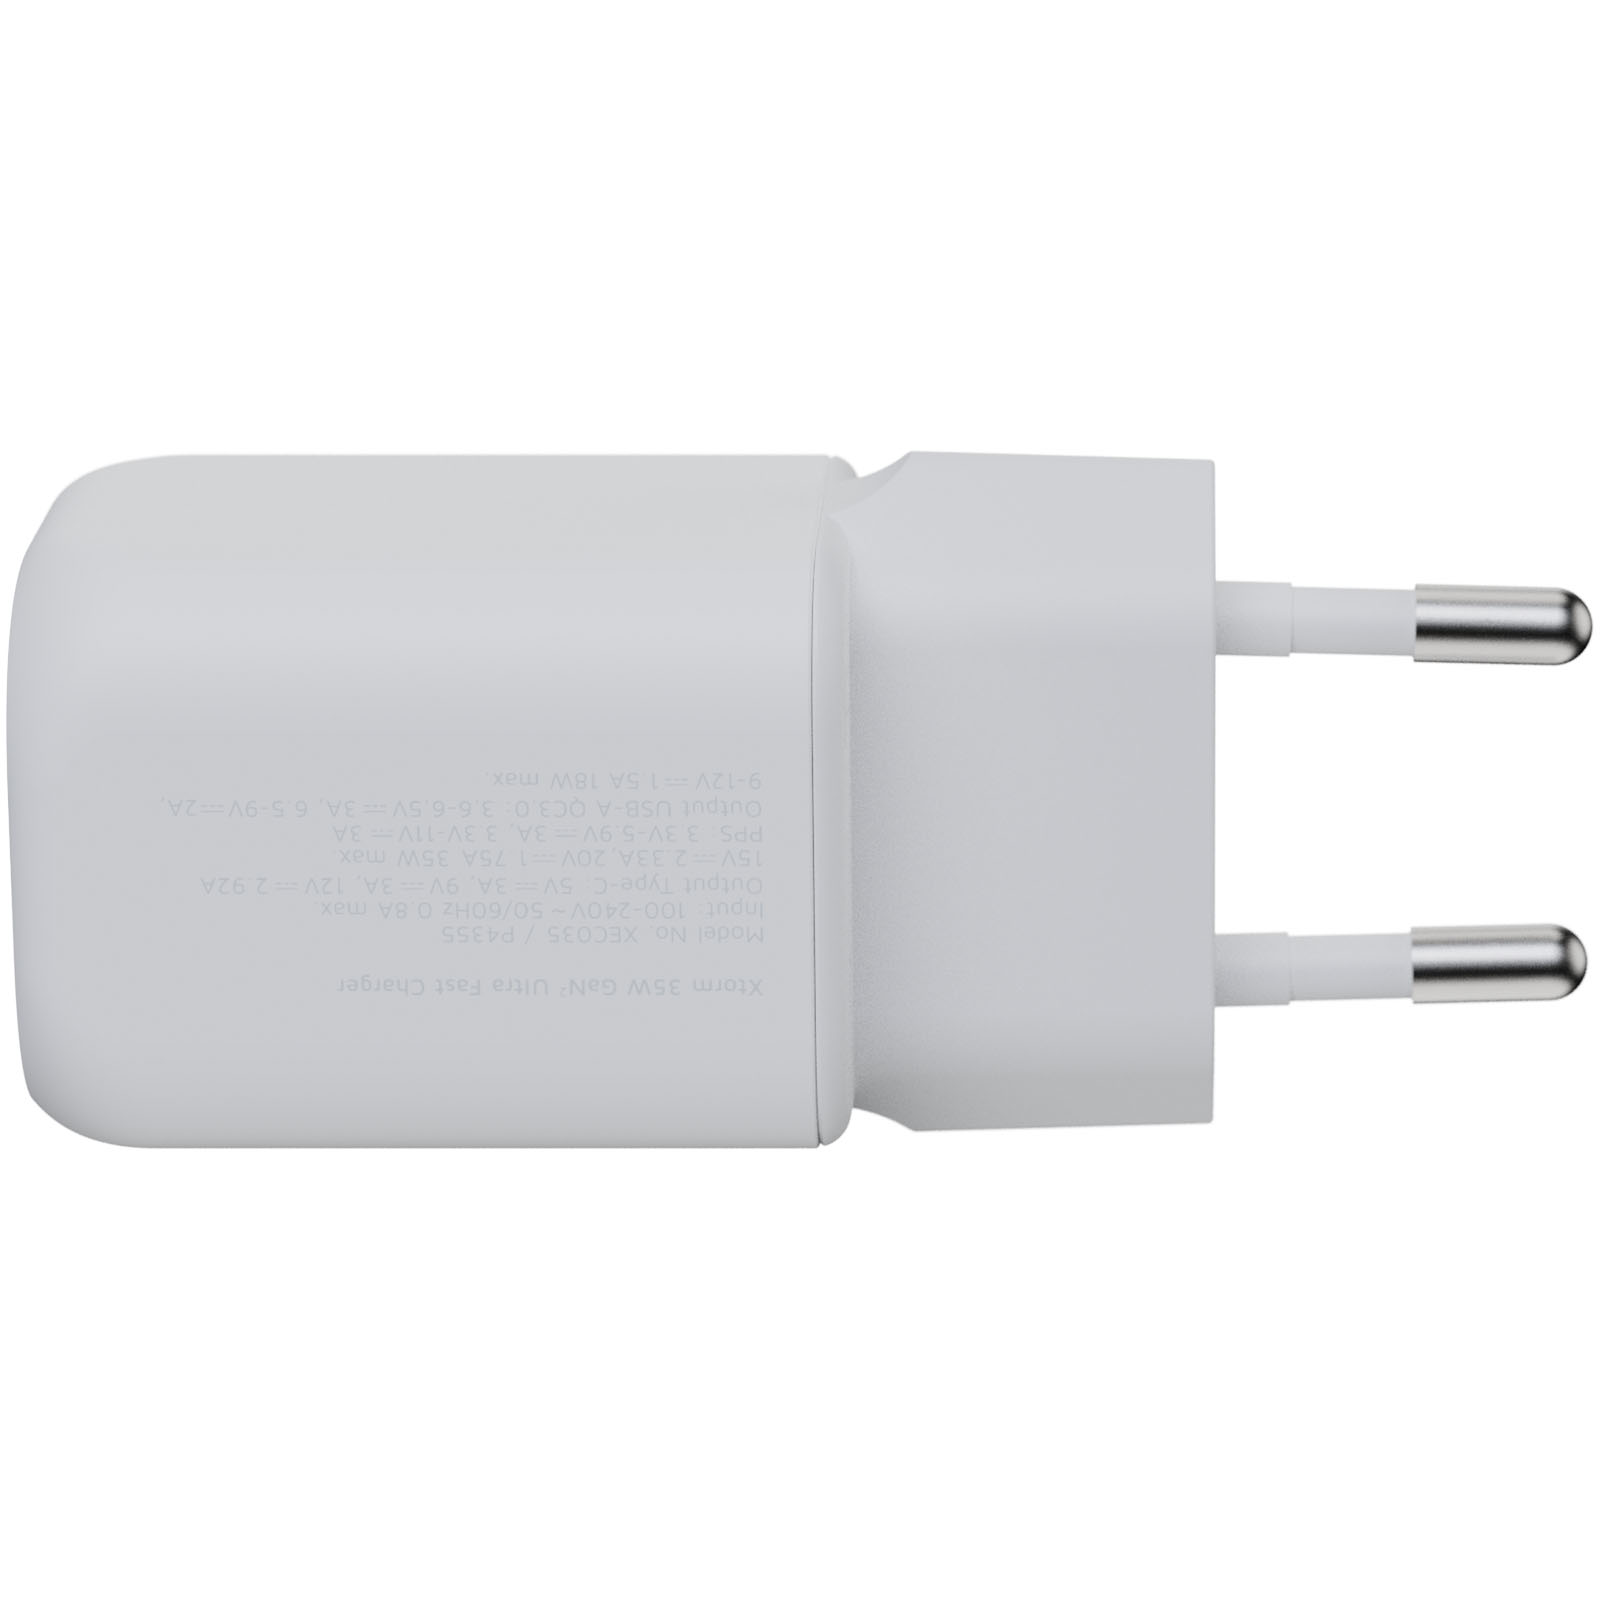 Advertising Chargers - Xtorm XEC035 GaN² Ultra 35W wall charger - 3